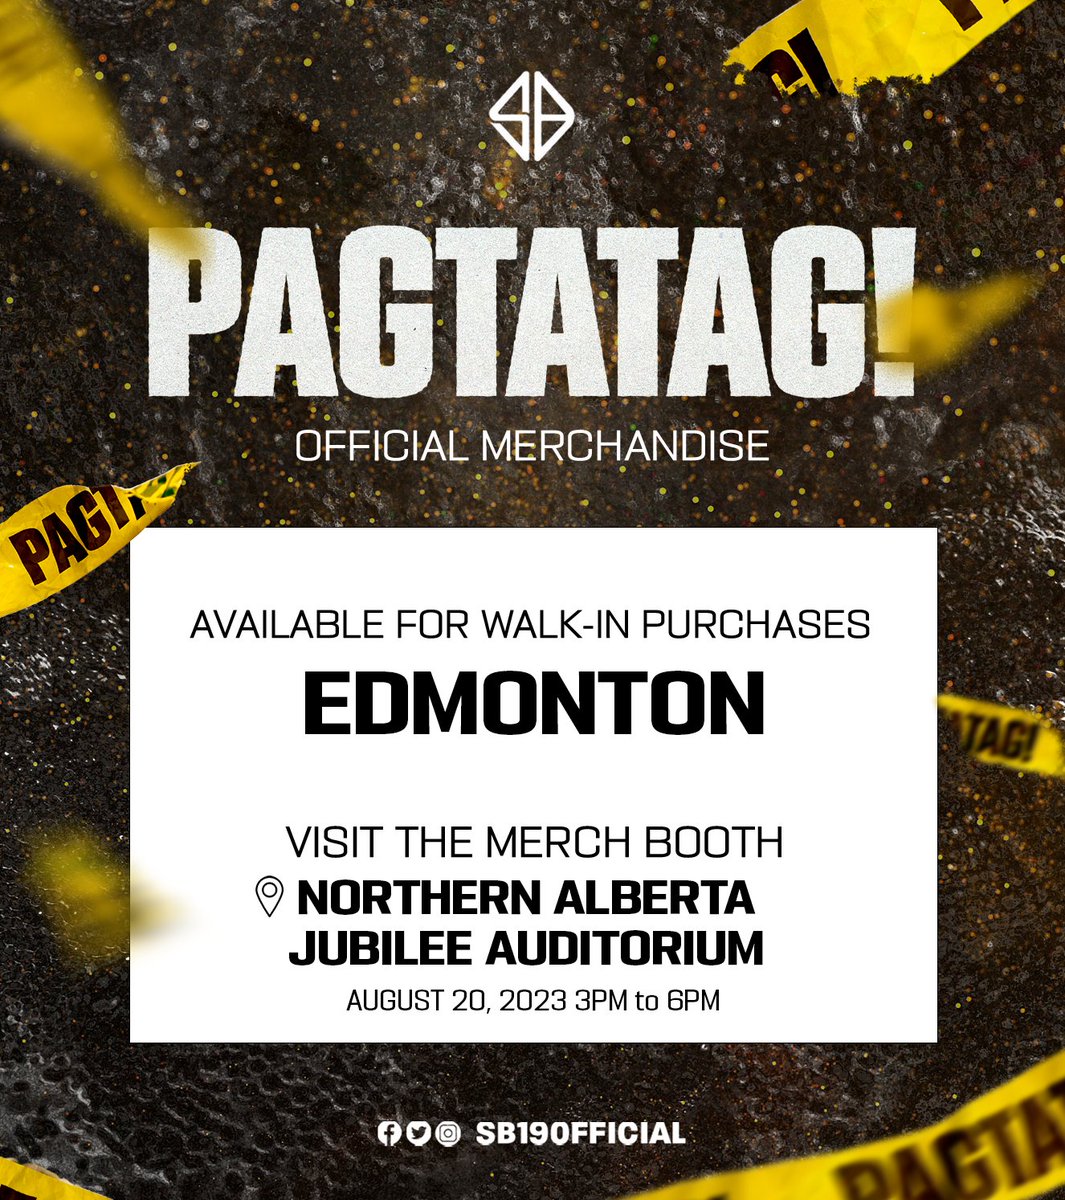 ⚠️ SB19 'PAGTATAG!' OFFICIAL MERCH EDMONTON

Available for walk-in purchases today
📍Merch booth at Northern Alberta Jubilee Auditorium
August 20, 2023 3PM to 6PM MT

❓Get your questions answered on
1zmerch.com/pages/faq

#SB19 #PAGTATAG #SB19PAGTATAG
#SB19PAGTATAGWorldTour…